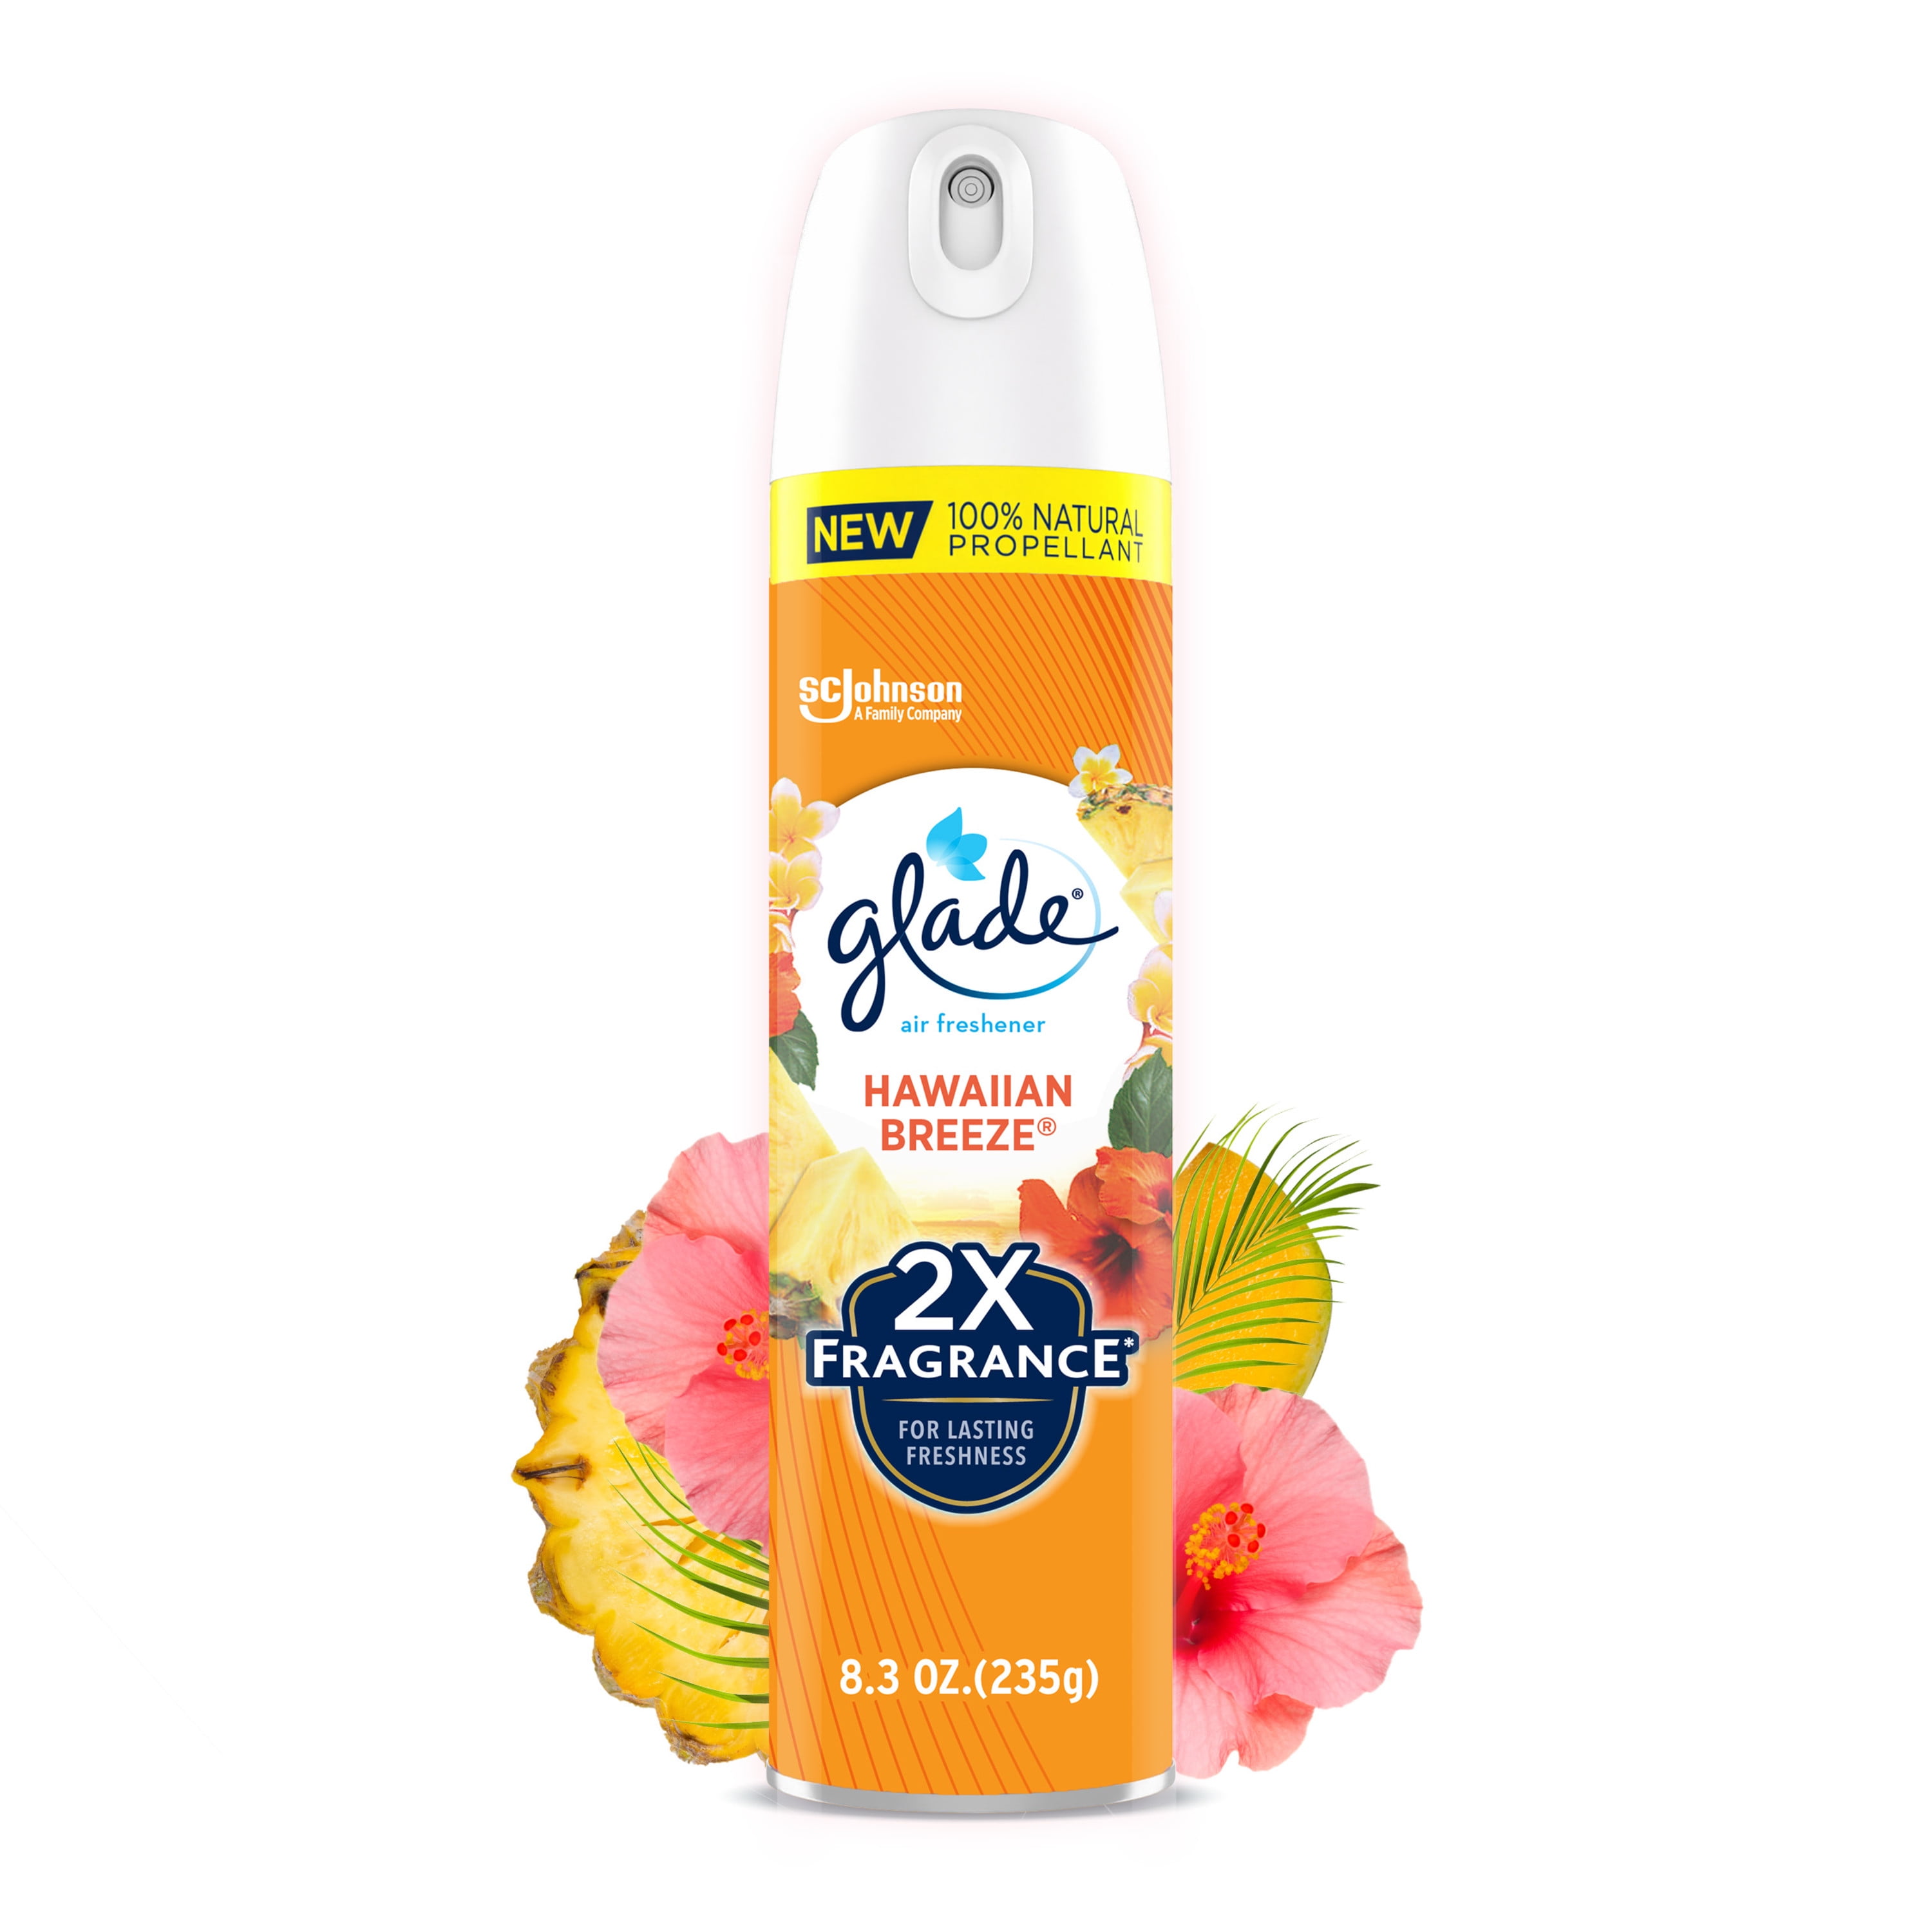 Glade Aerosol Spray, Air Freshener for Home, Hawaiian Breeze Scent, Fragrance Infused with Essential Oils, Invigorating and Refreshing, with 100% Natural Propellent, 8.3 Oz